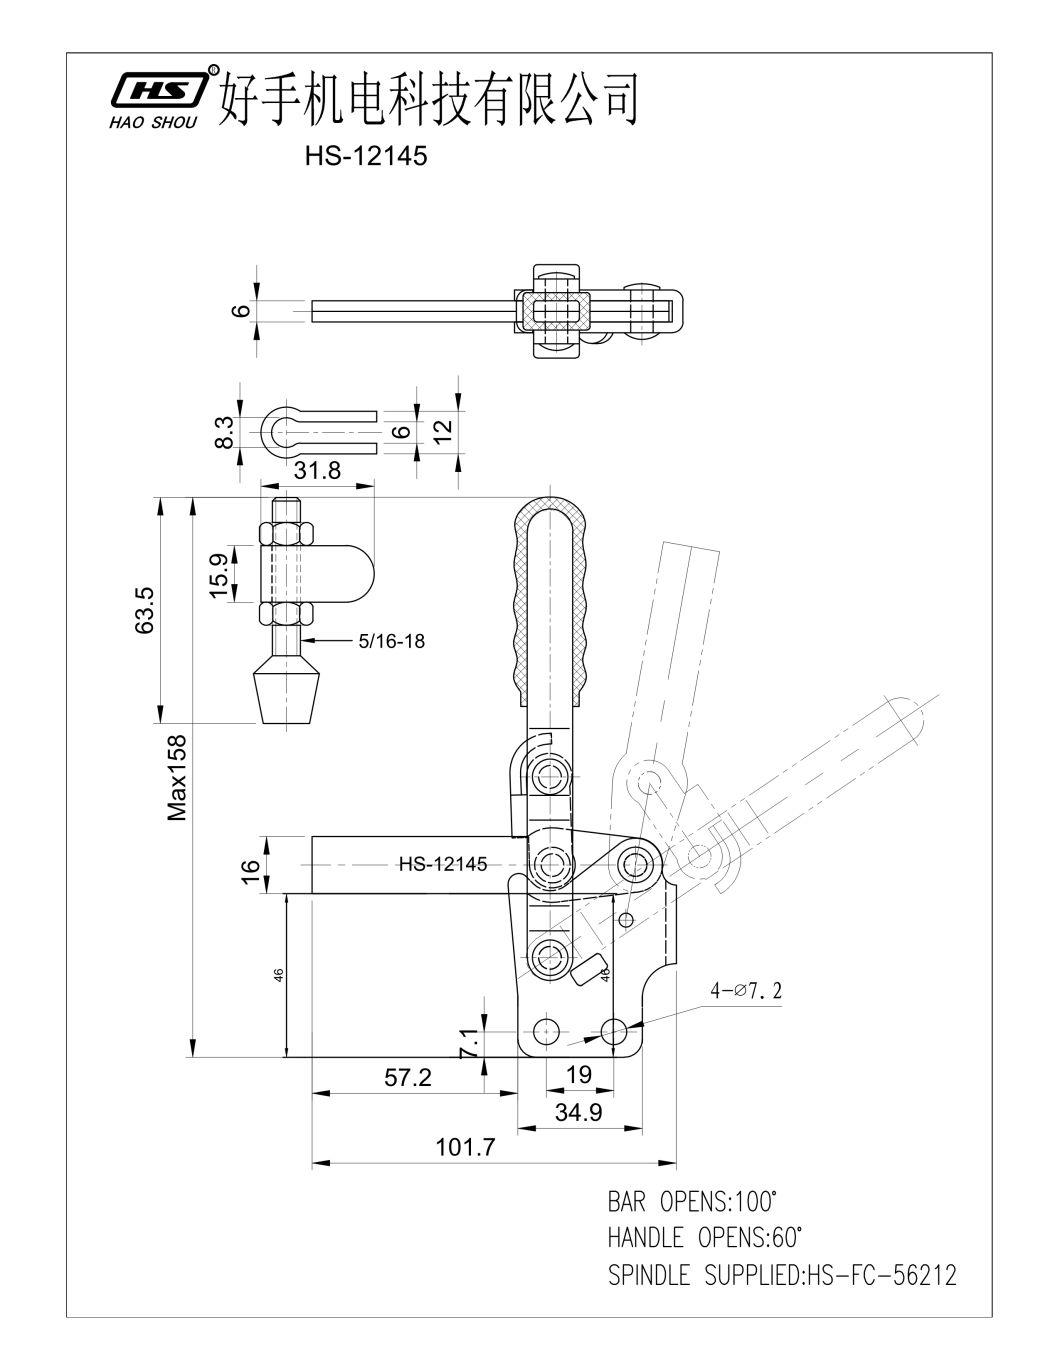 HS-12145 Same as 207-Sb Hold Down Quick Release Vertical Adjustable Toggle Clamp for Wood Products